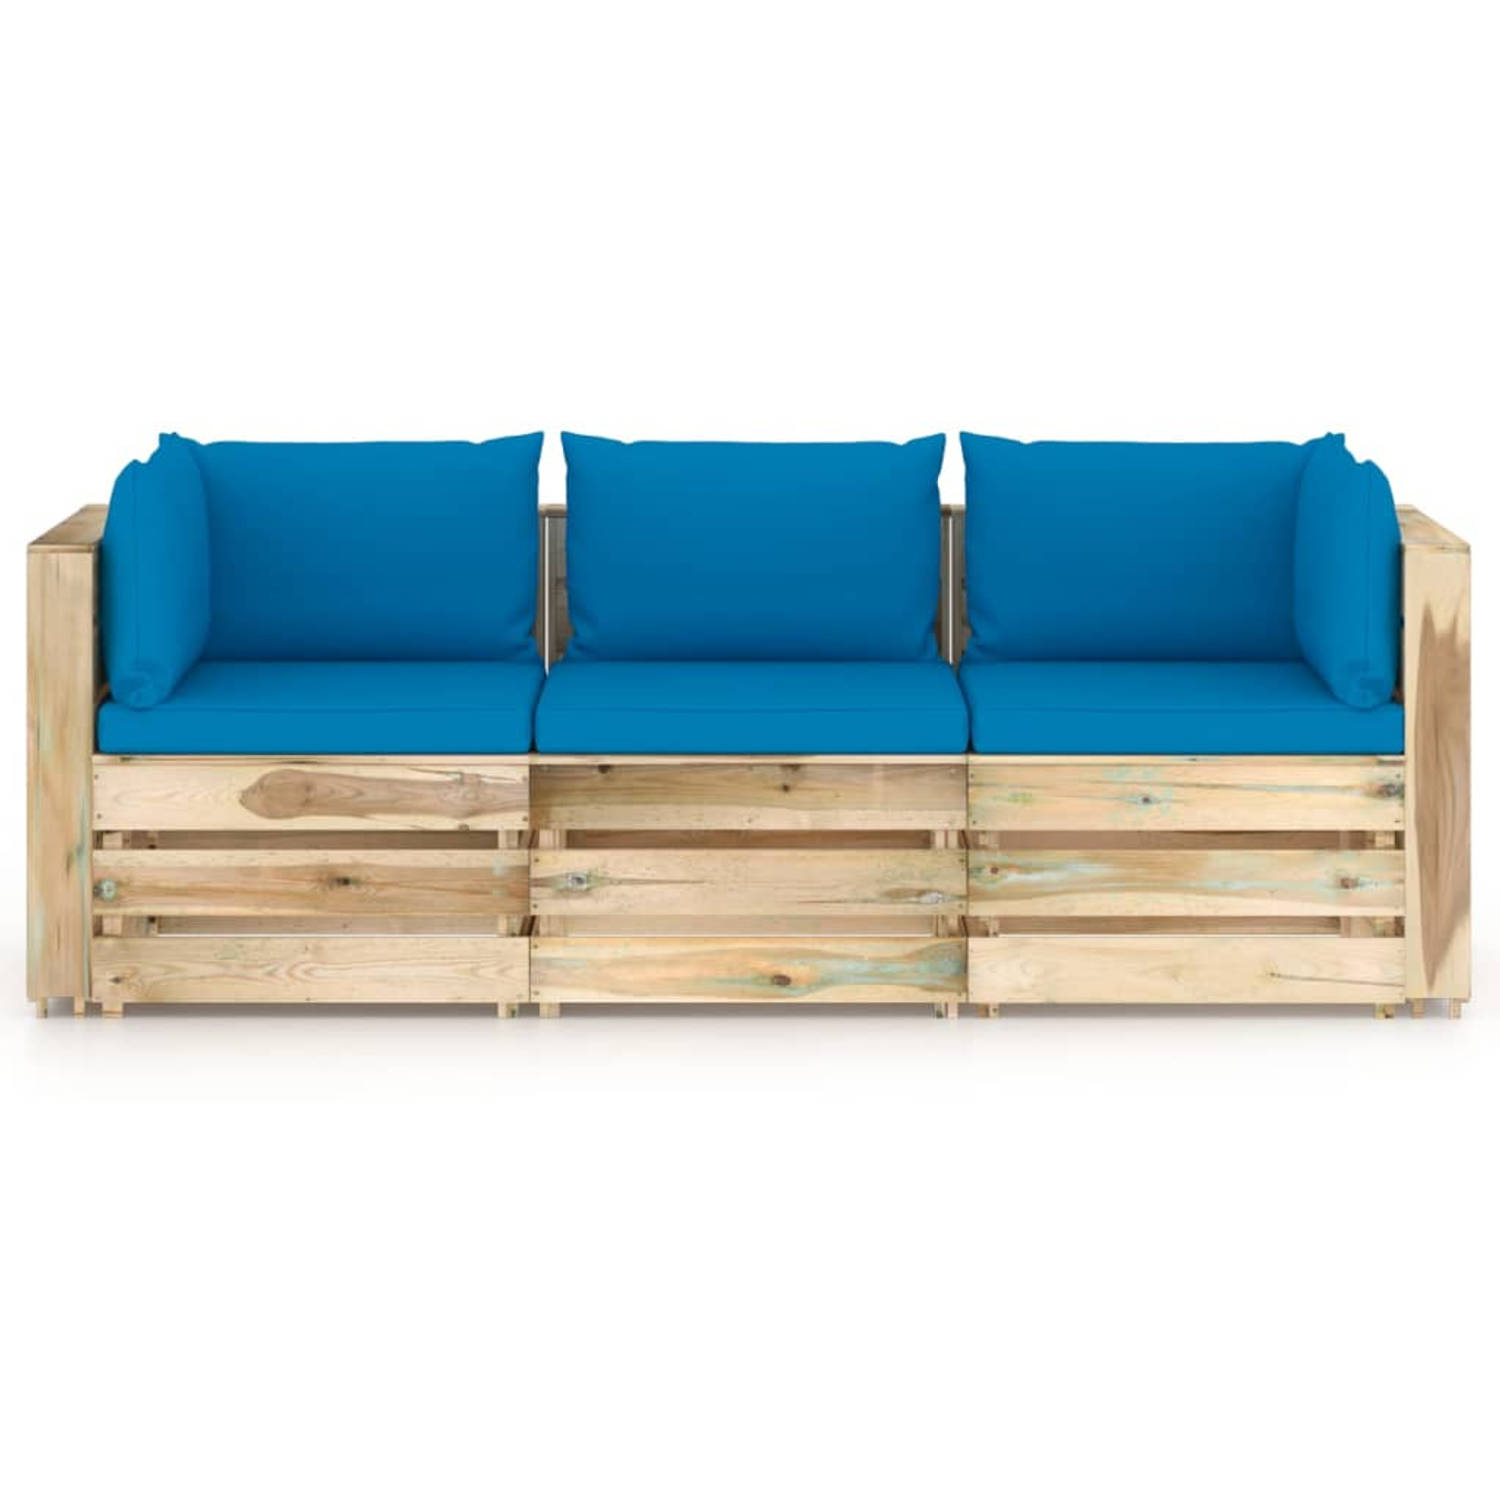 The Living Store Palletbank - Grenenhout - 69x70x66 cm - Lichtblauwe kussens